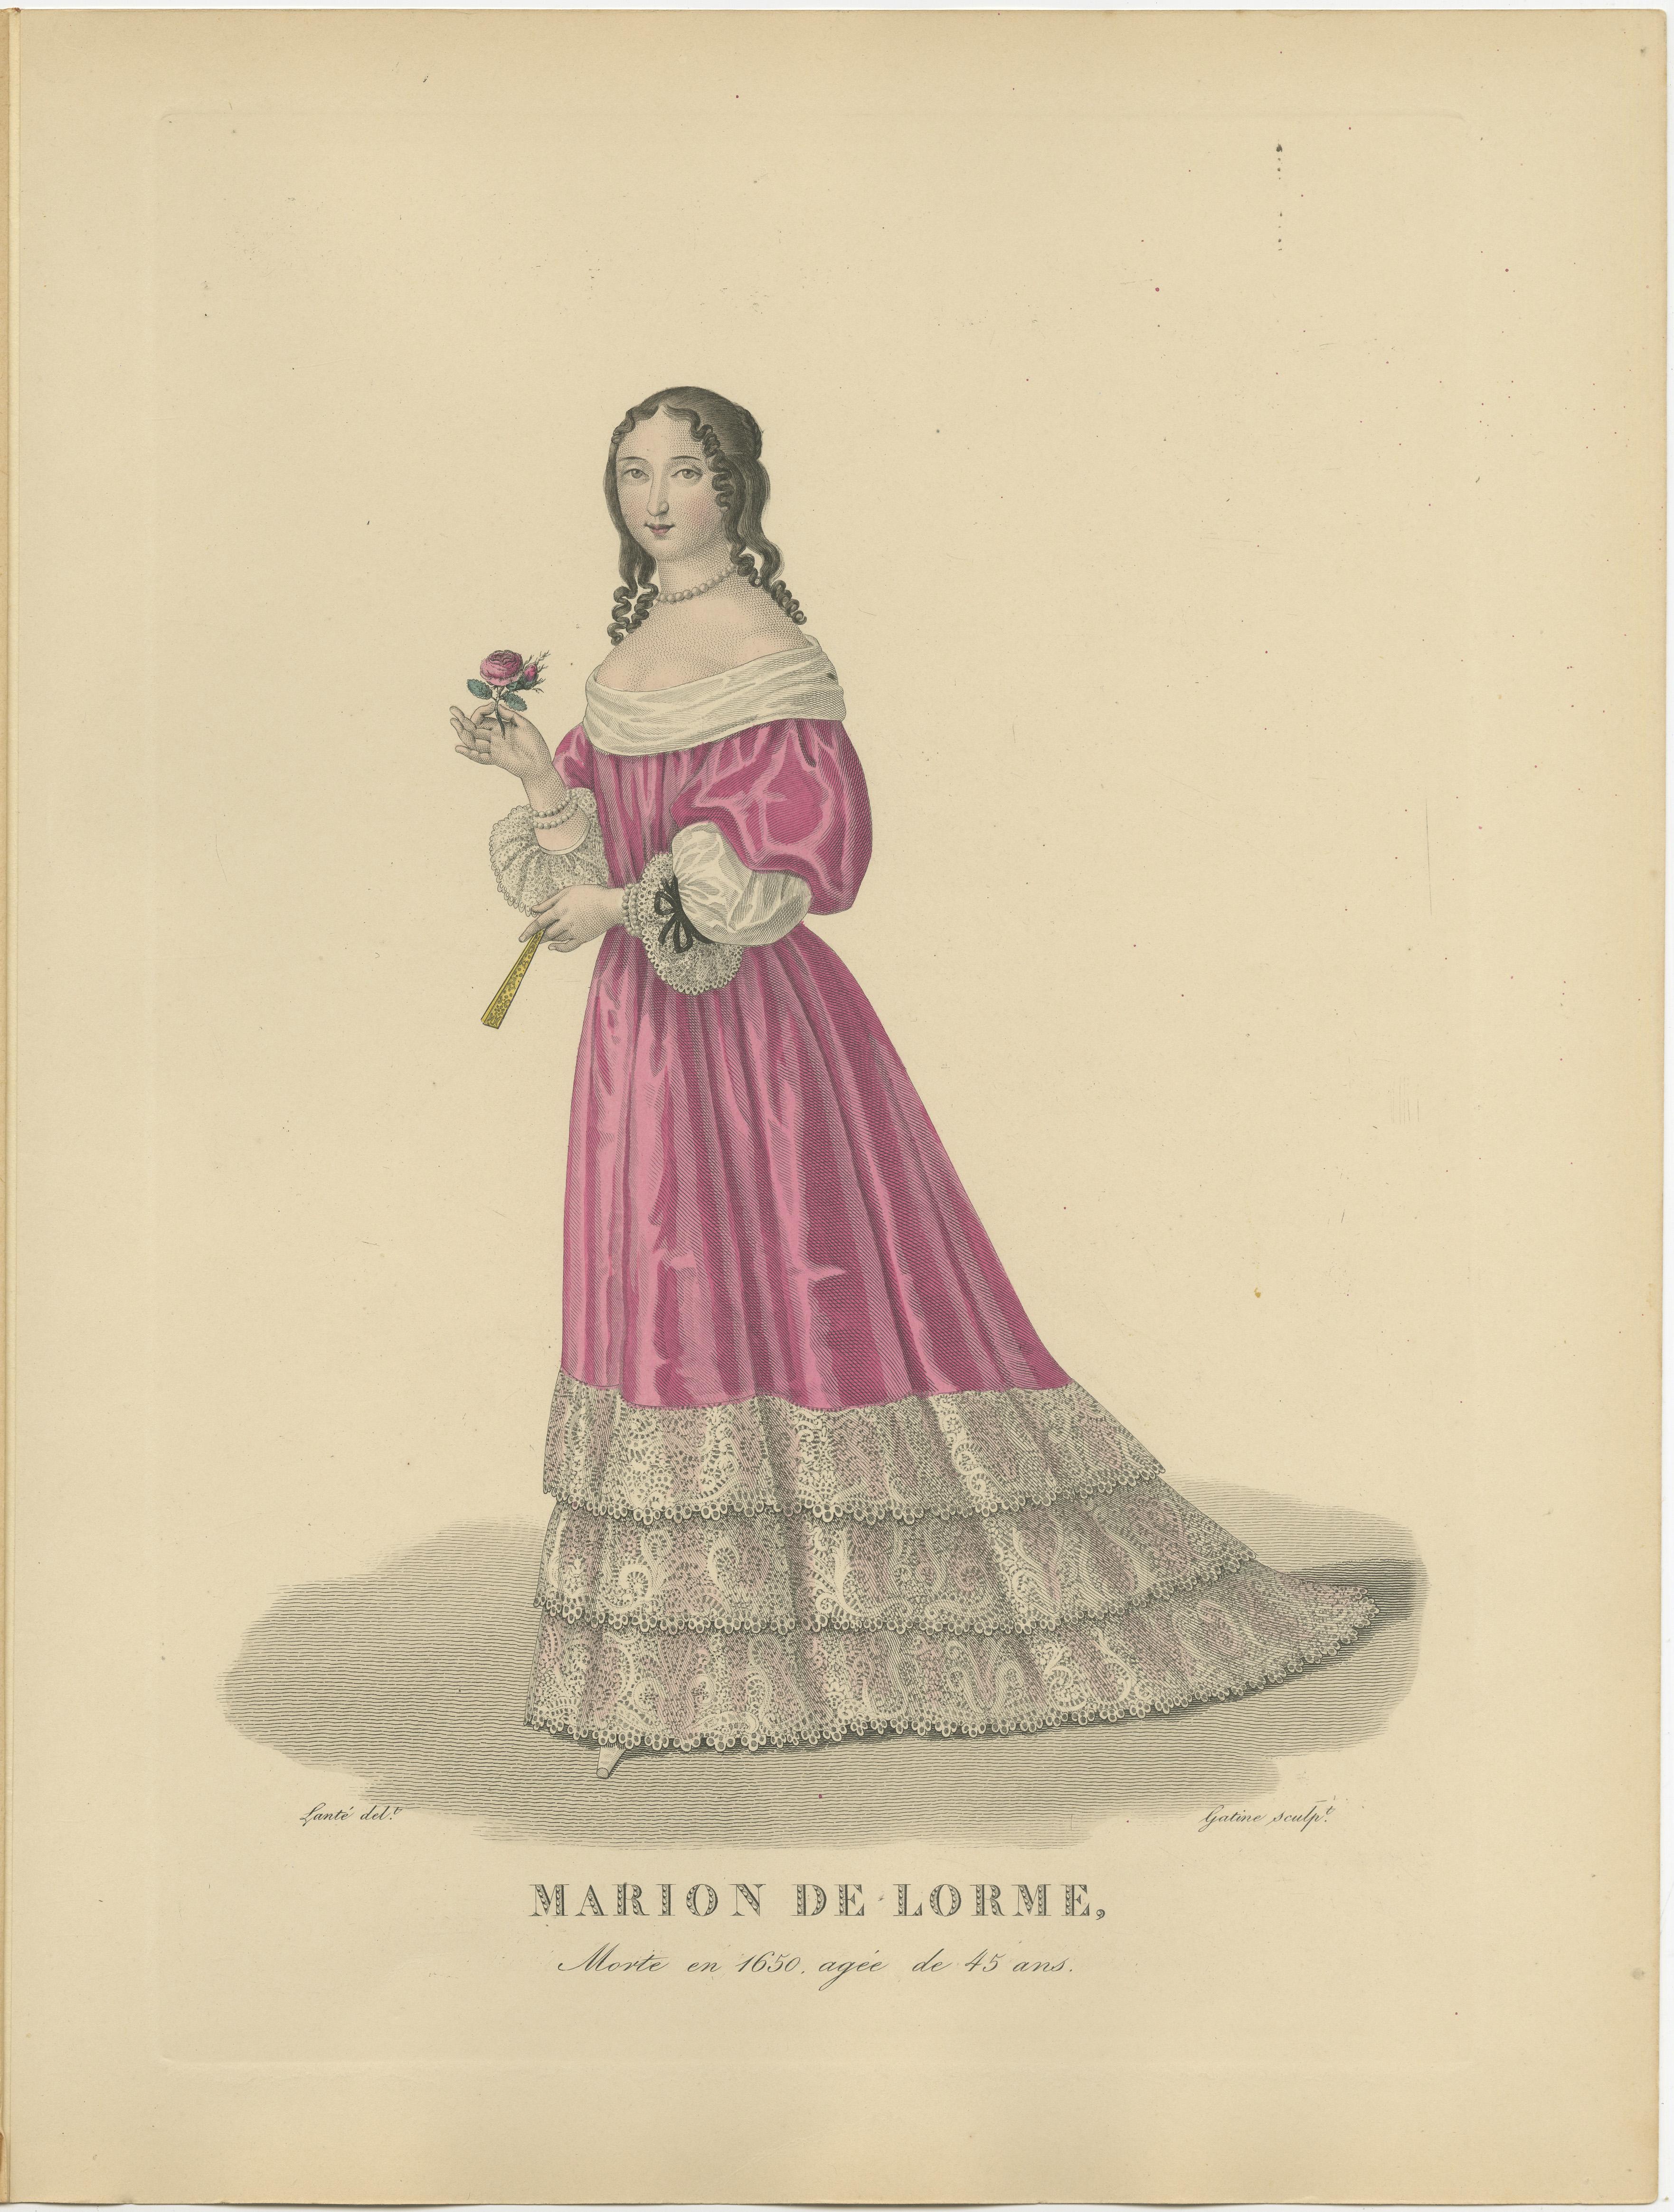 Antique print titled 'MARION DE LORME' Original antique print of Marion Delorme.

Marion Delorme (3 October 1613 – 2 July 1650) was a French courtesan known for her relationships with the important men of her time.

She was the daughter of Jean